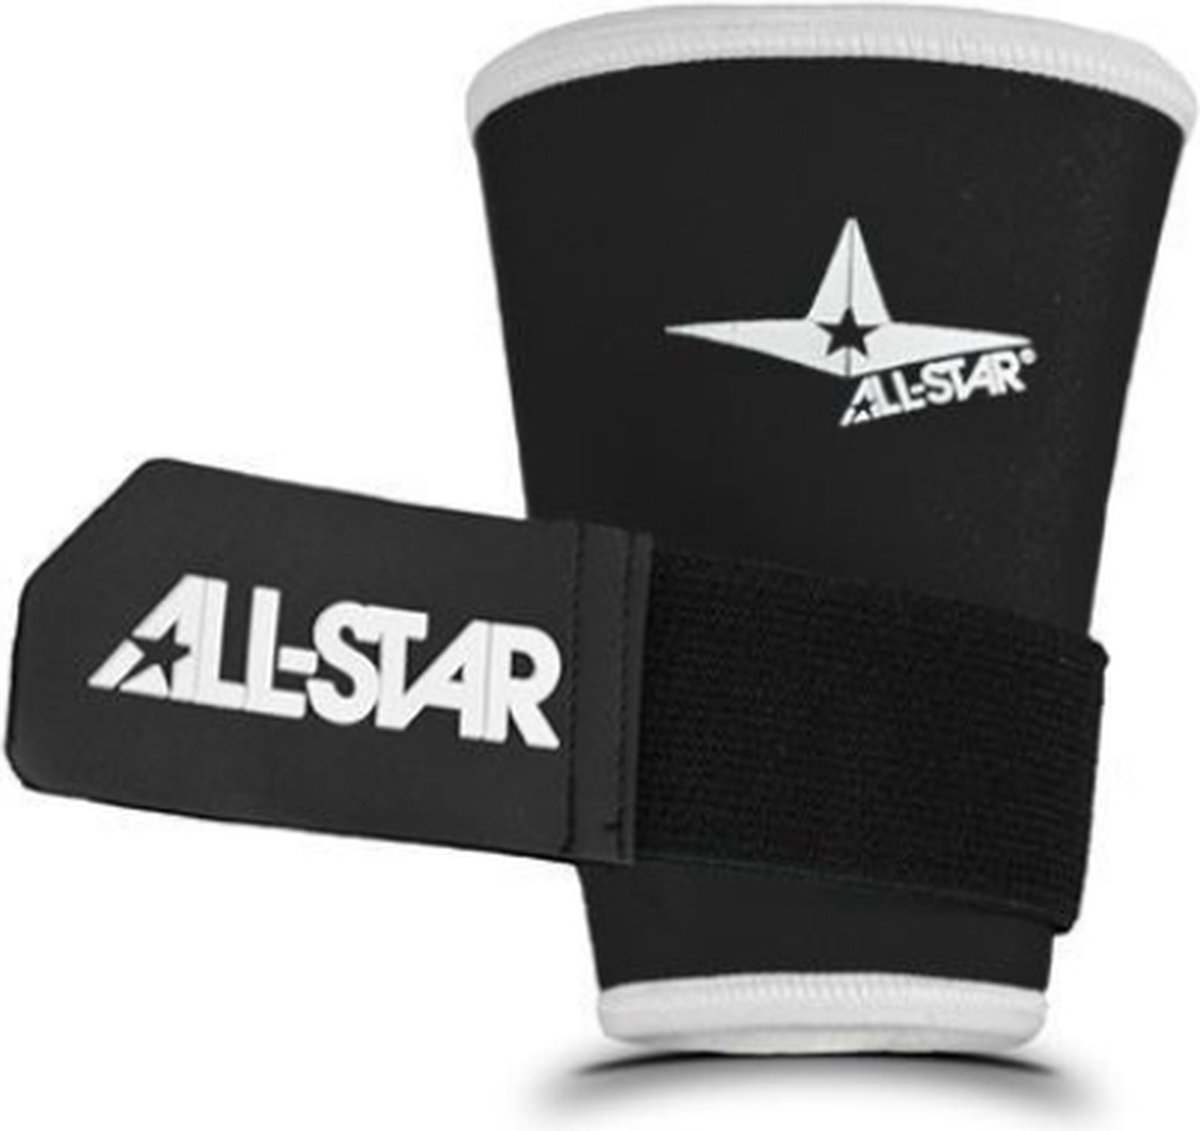 All Star WG5001 Compression Wristband with Strap M Black